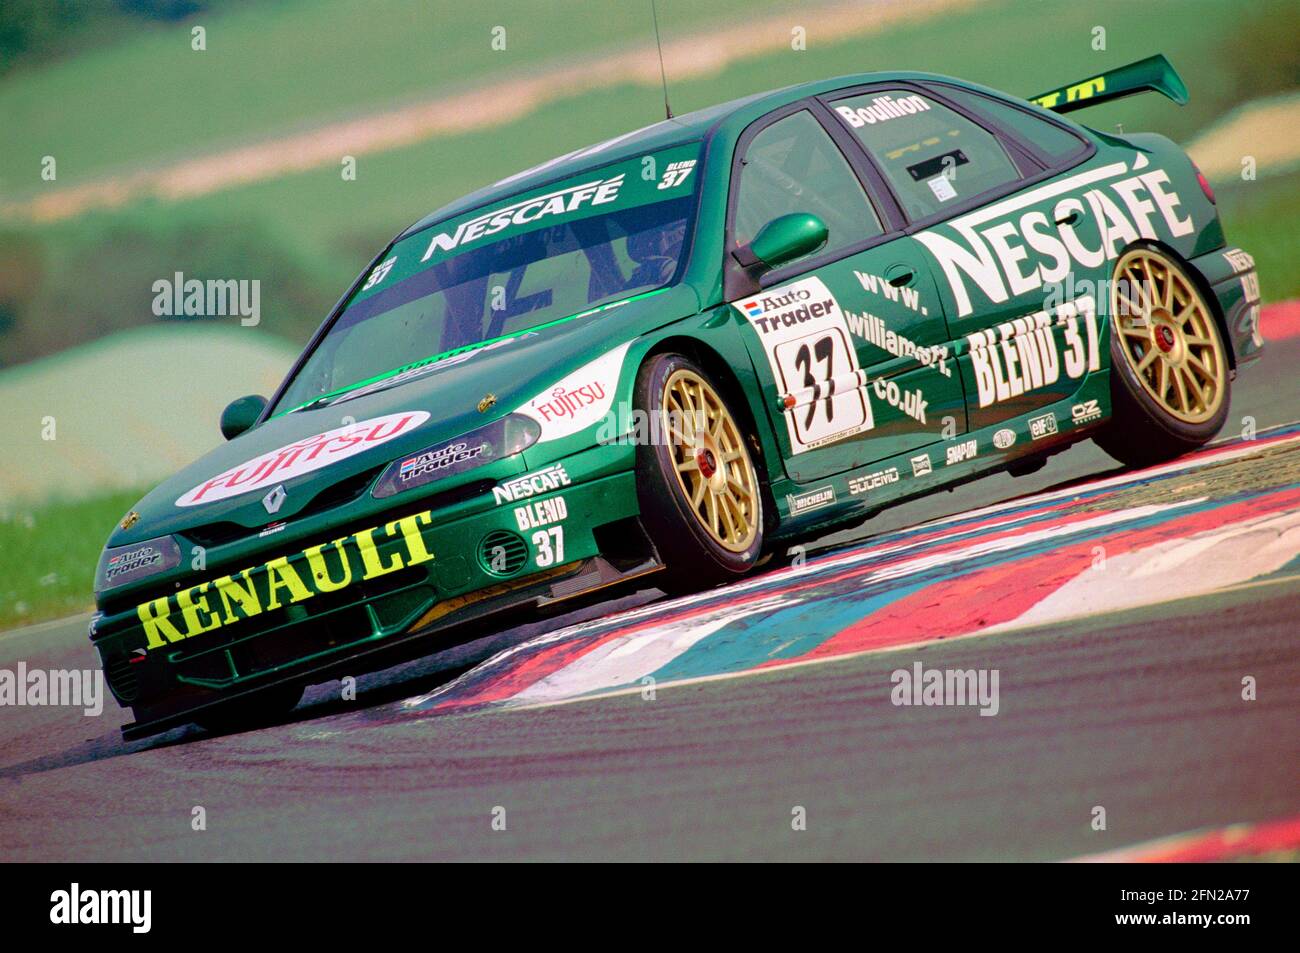 Jean-Christophe Boullion runs over the Club Chicane at Thruxton Circuit in the British Touring Car Championship in 1999 driving the Nescafe blend 37 Williams Renault. Stock Photo